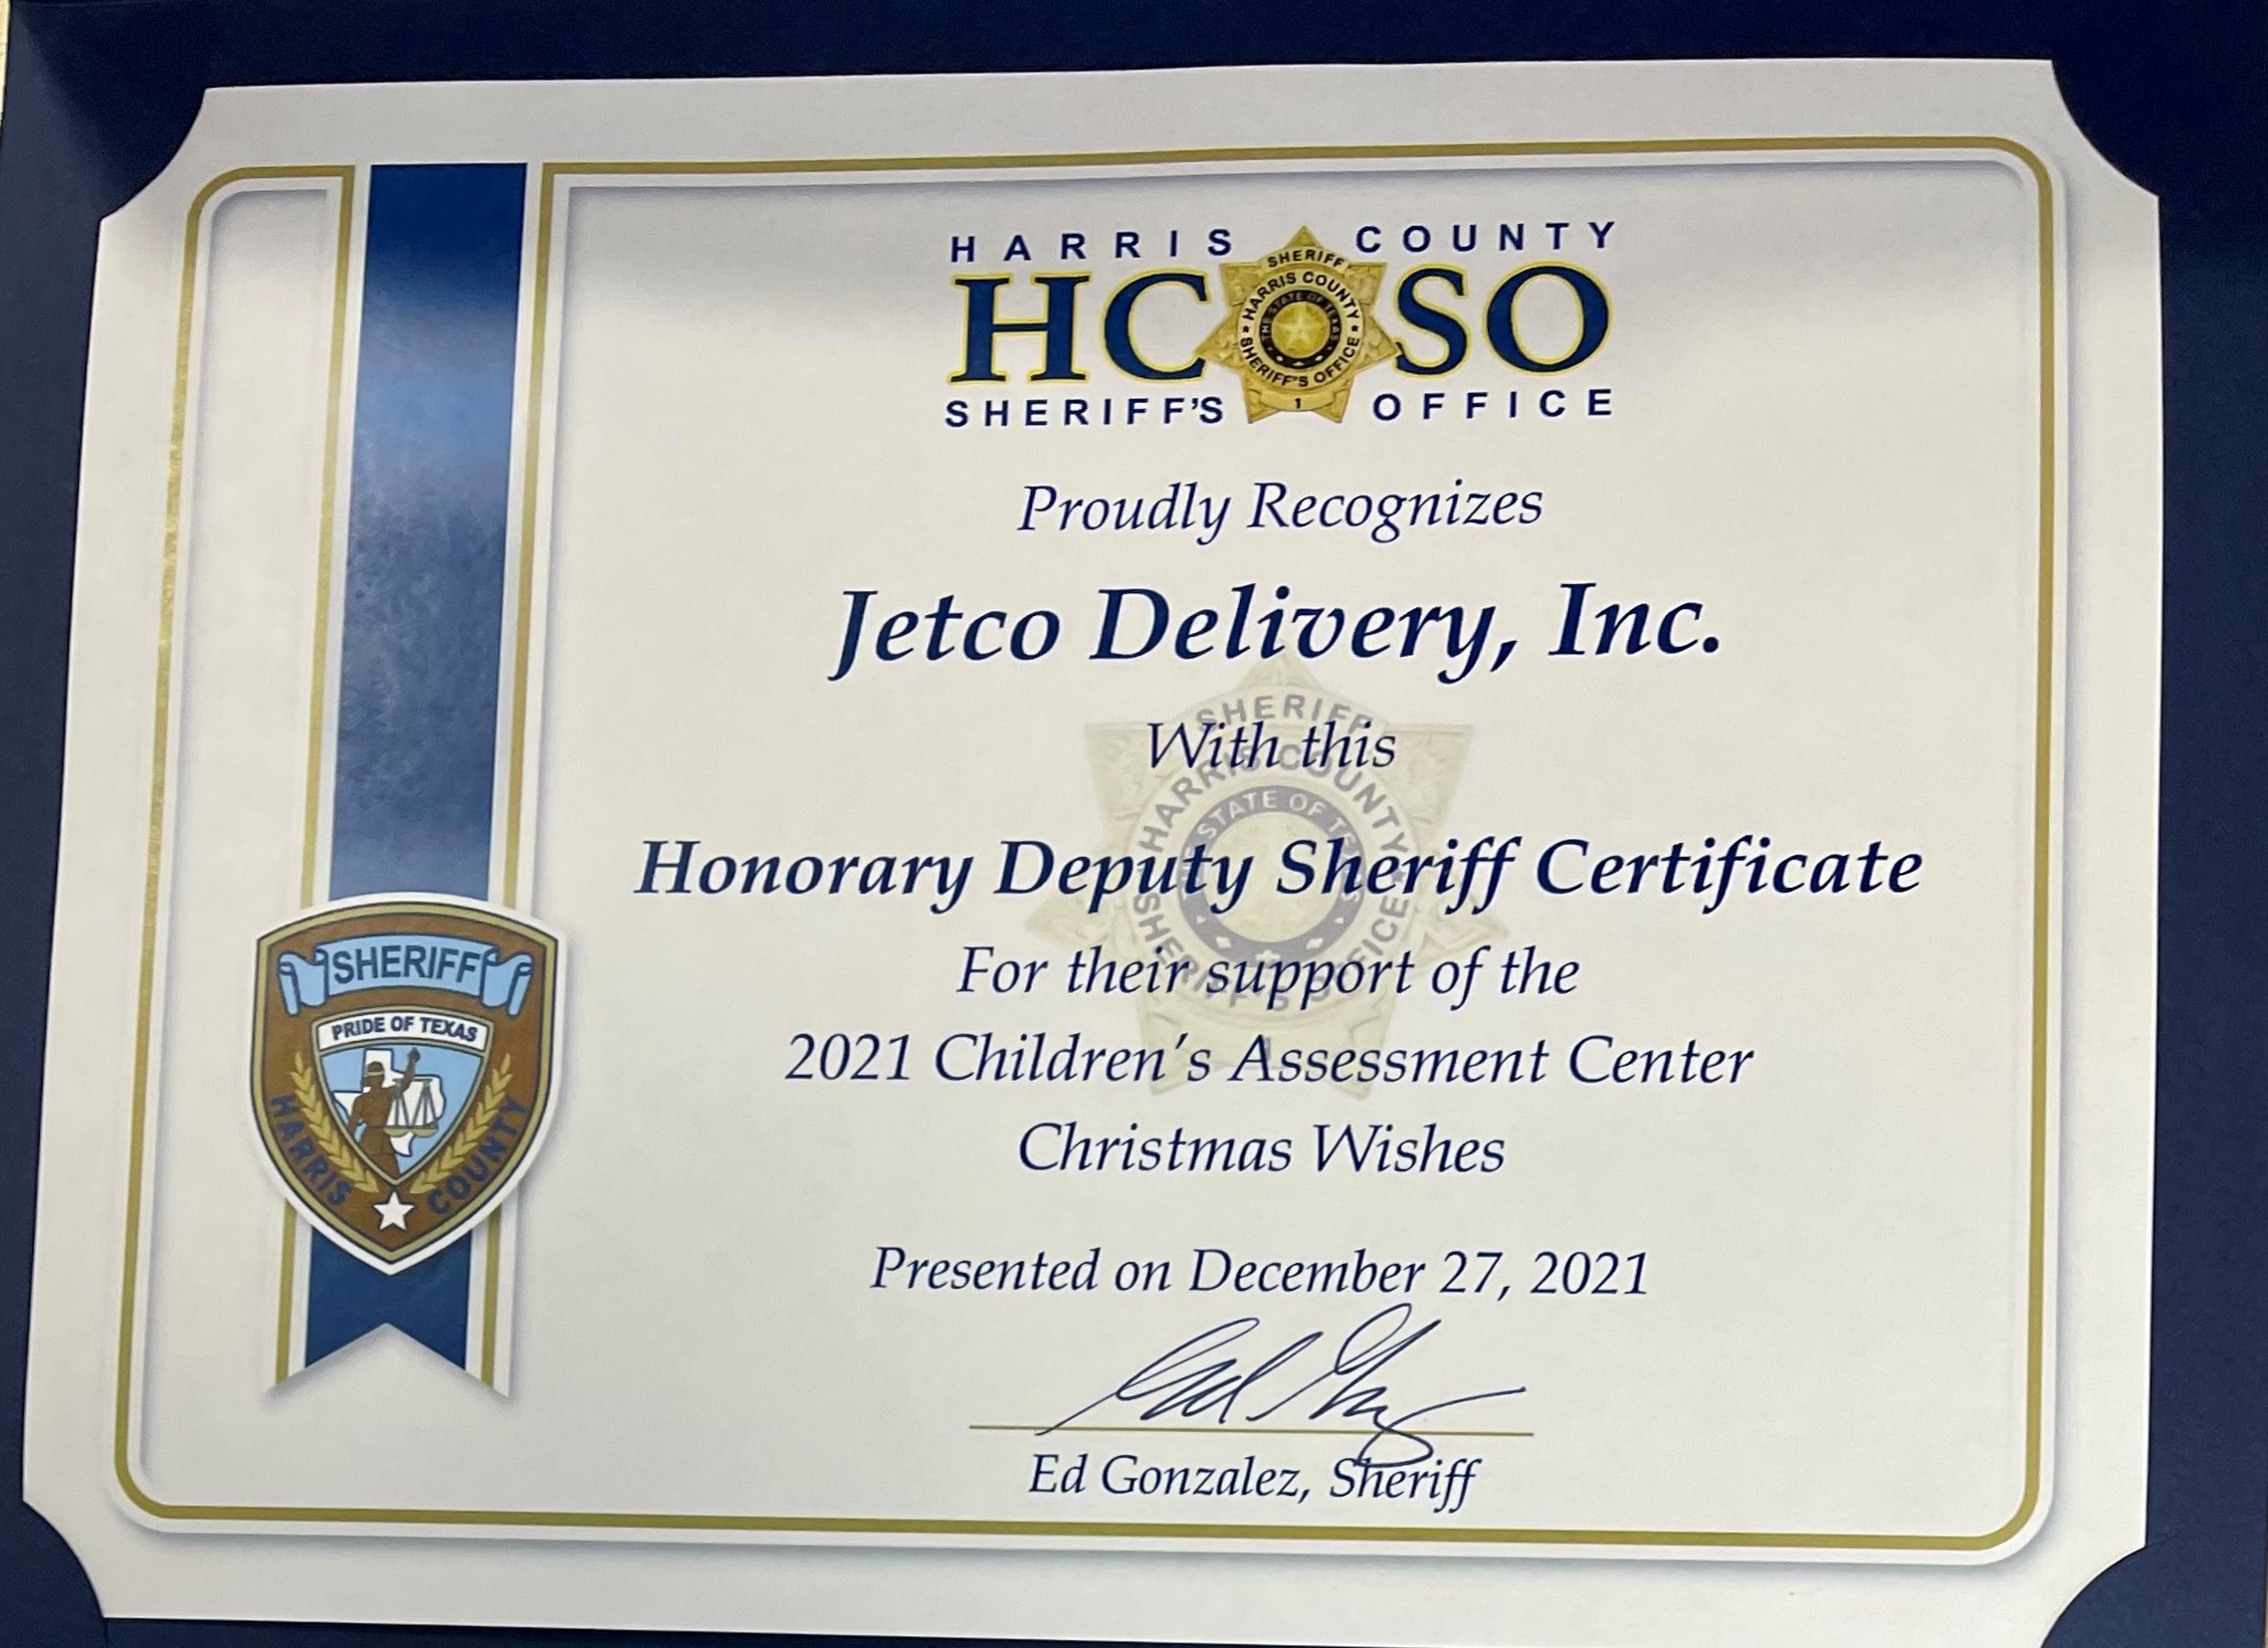 Harris County Sheriff's Office Recognizes Jetco Delivery